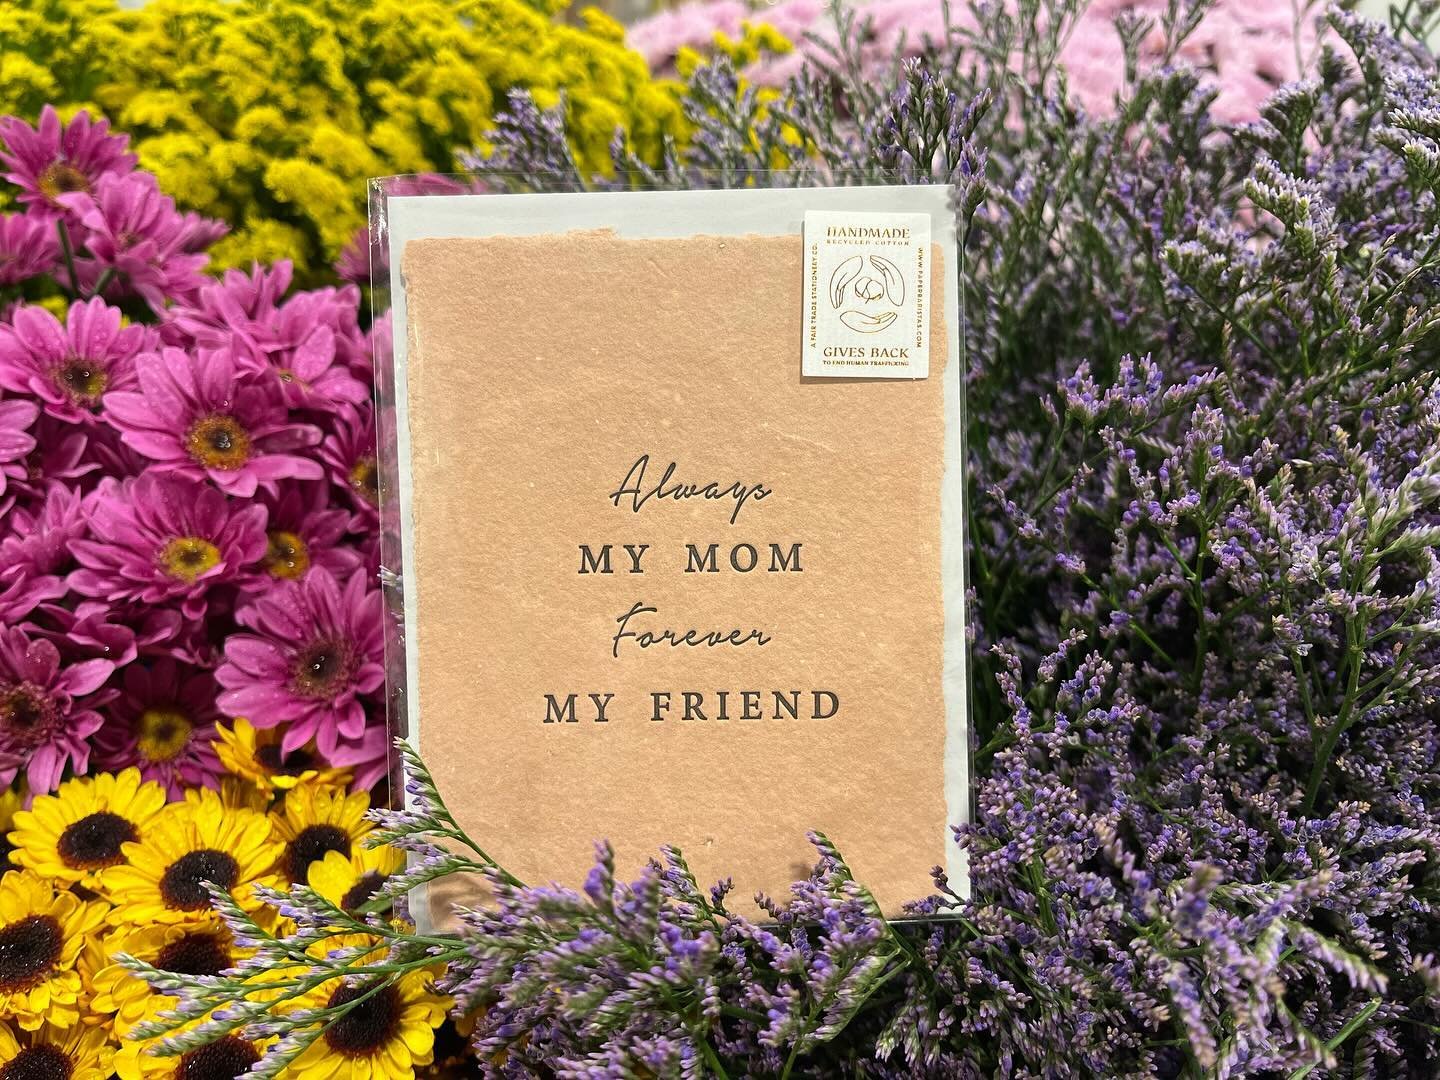 It&rsquo;s almost Mother&rsquo;s Day 💕

we will have an sidewalk set up tomorrow and tons of flowers &amp; gift options. Make sure to stop by and pick up something special for the moms in your life 🌷